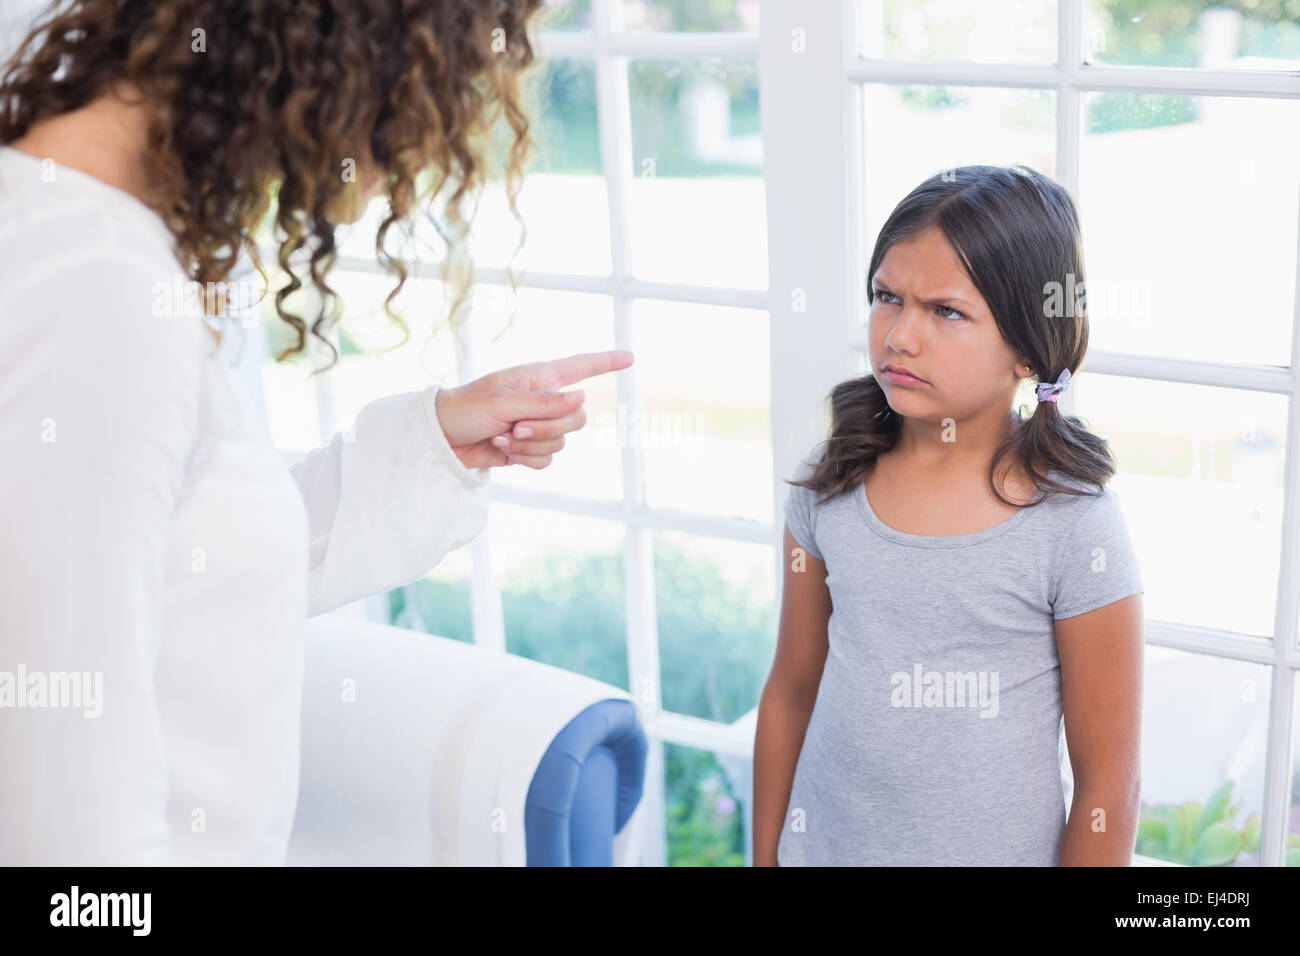 https://c8.alamy.com/comp/EJ4DRJ/angry-little-girl-looking-at-her-mother-EJ4DRJ.jpg